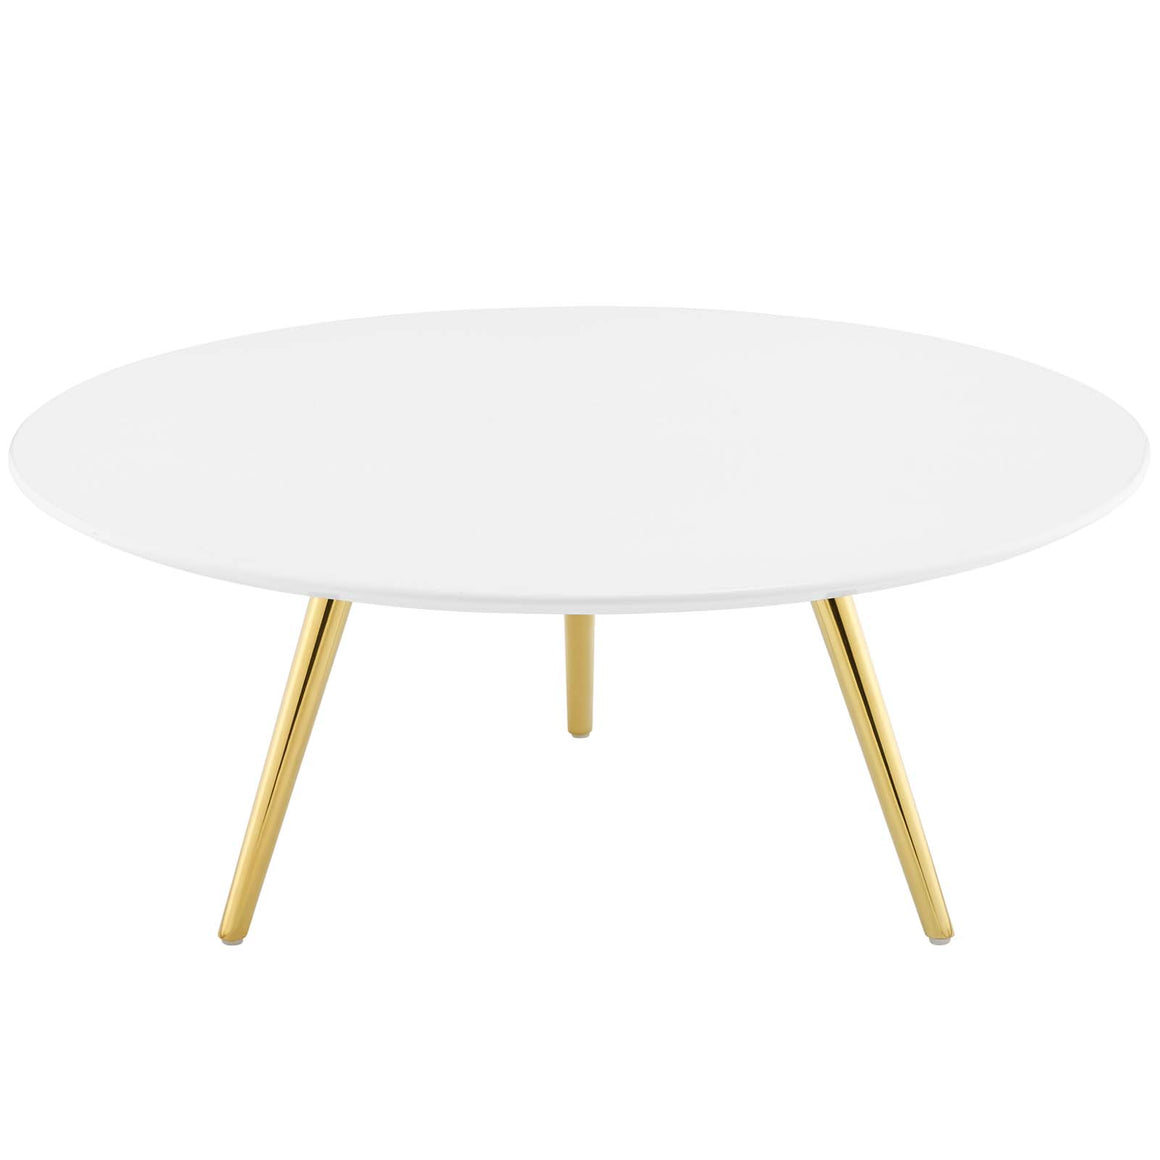 Lippa 36" Round Wood Top Coffee Table with Tripod Base in Gold White